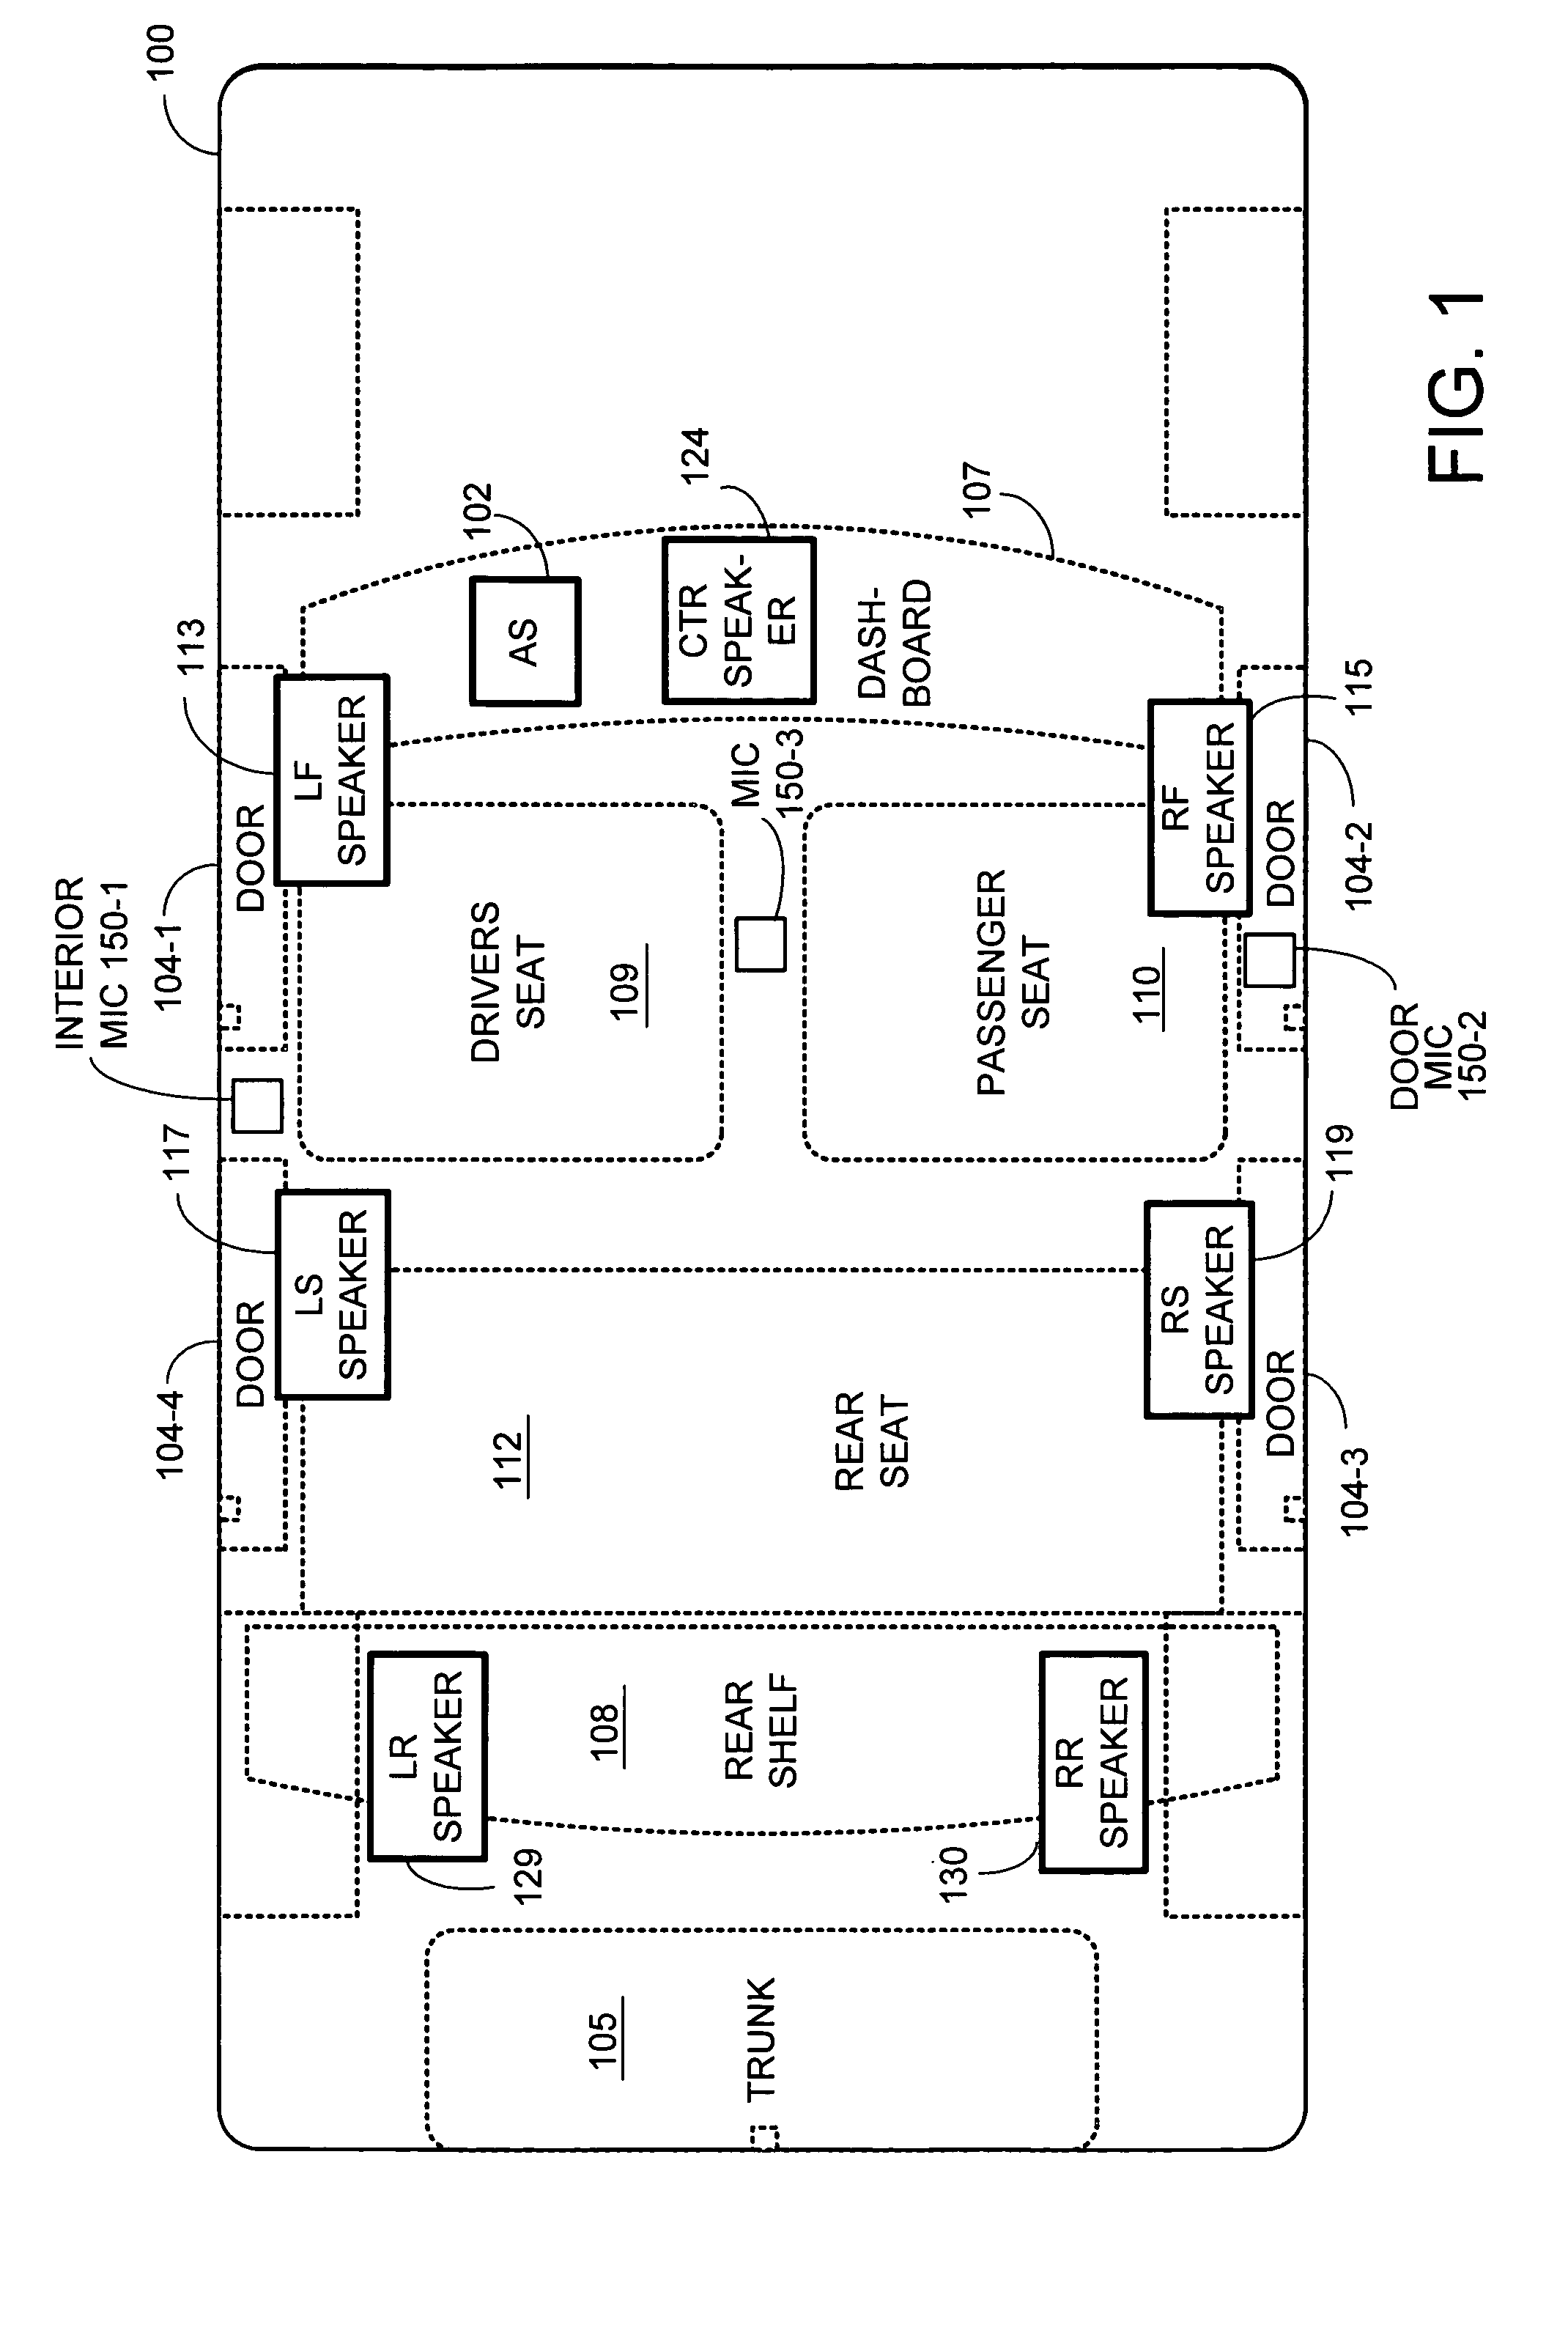 Sound processing system for configuration of audio signals in a vehicle